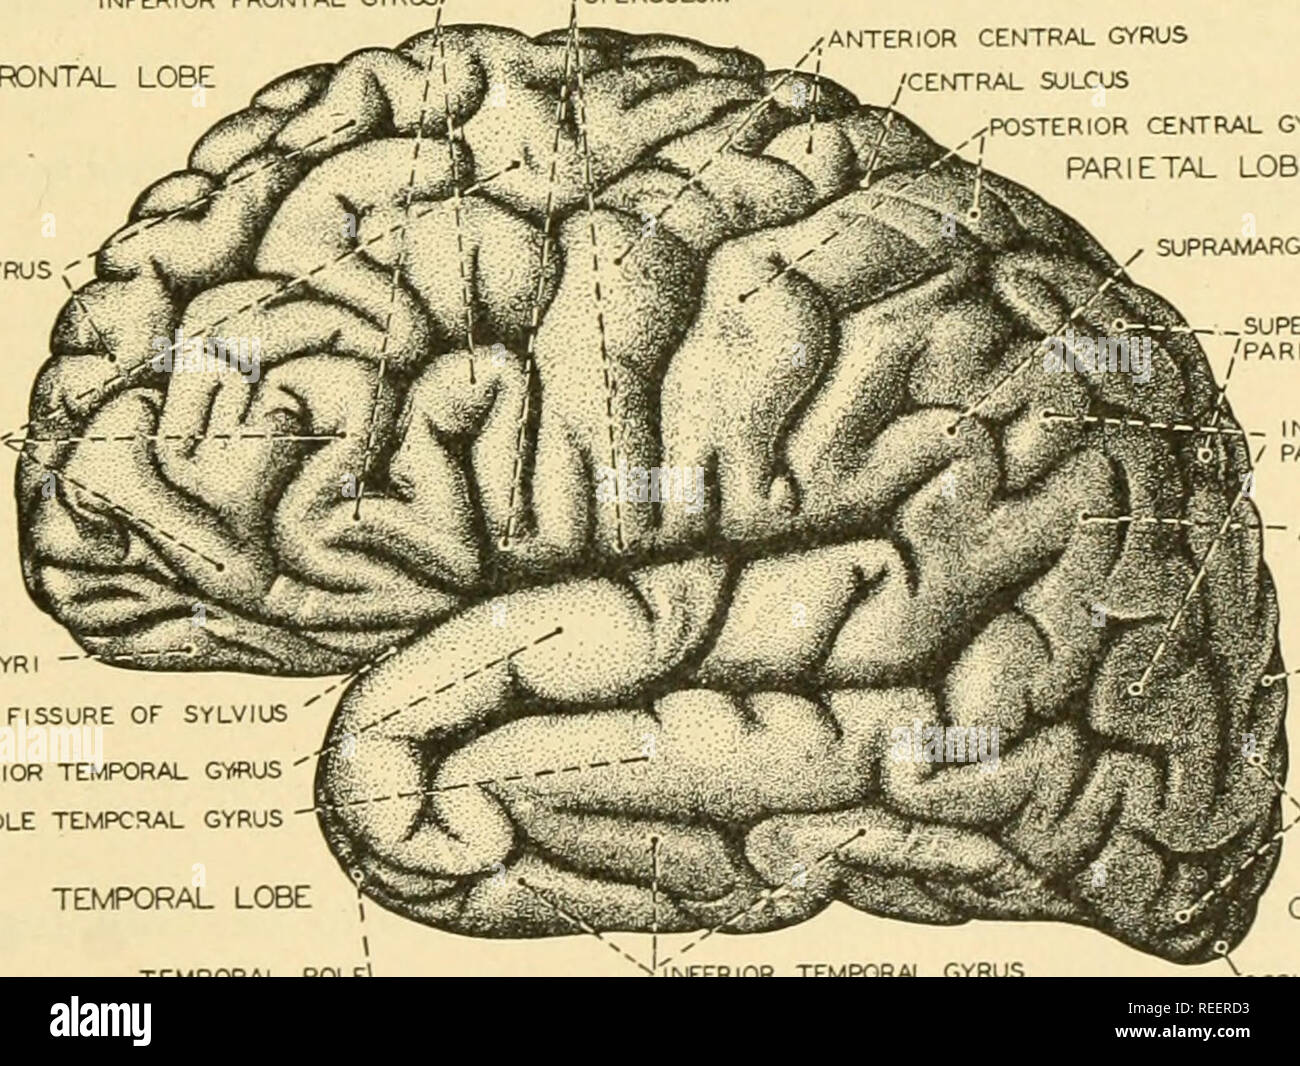 Comparative anatomy. Anatomy, Comparative. ANGULAR GYRUS  C-PARIETO-OCCIPITAL FISSURE OCCIPITAL POut' L0NGITUD1NAL FISSURE Fig.  418.—The human brain in dorsal aspect. (Redrawn after Sobotta.) In  reptiles, the striatum becomes so greatly enlarged as